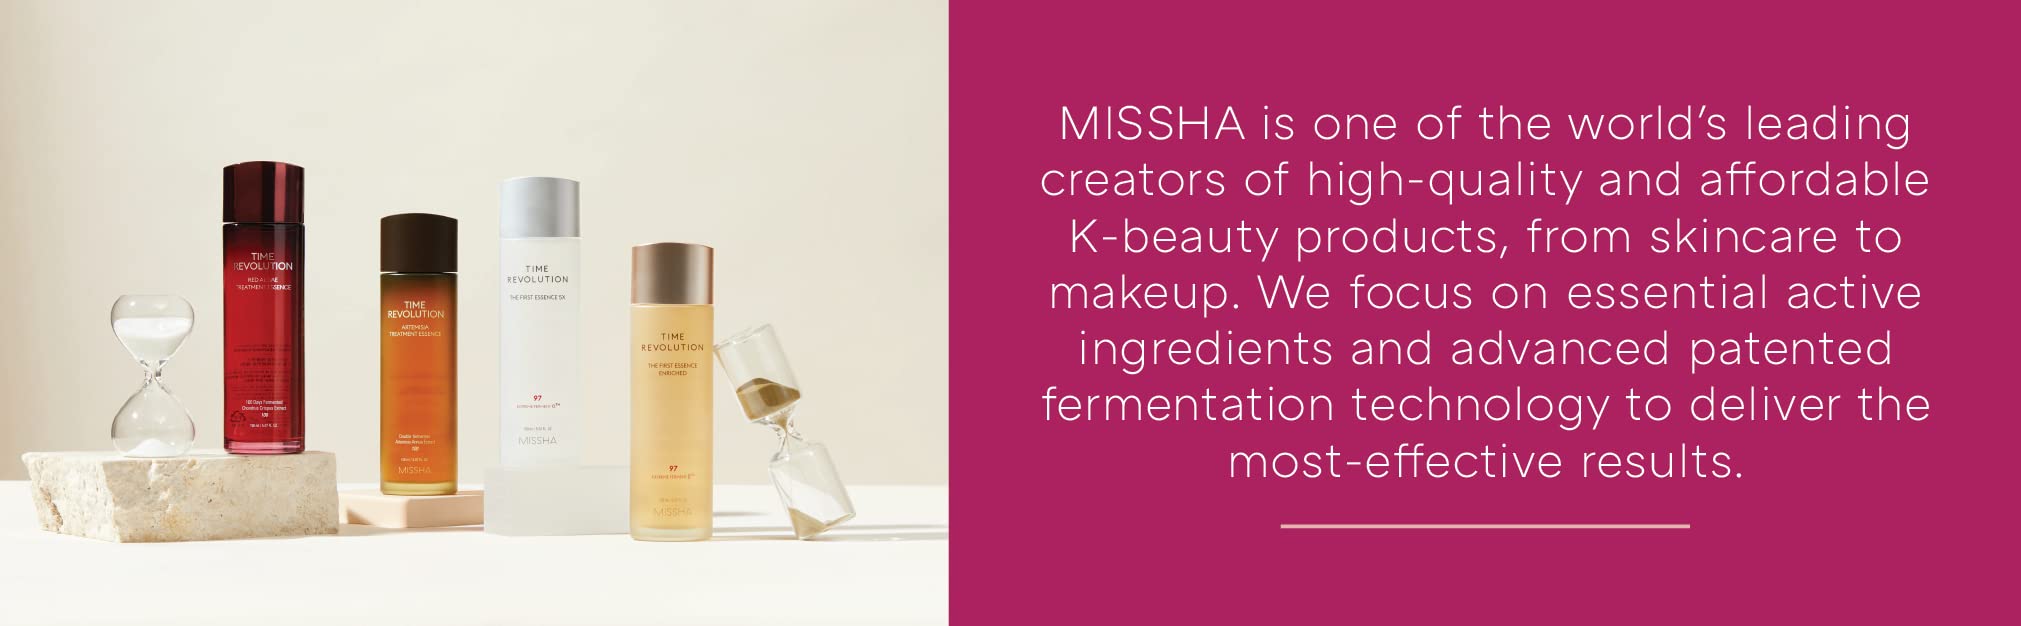 MISSHA Magic Cushion Foundation No.23 Natural Beige for light with neutral skin tone - Flawless Coverage, Dewy Finish, Easy Application for All Skin Types